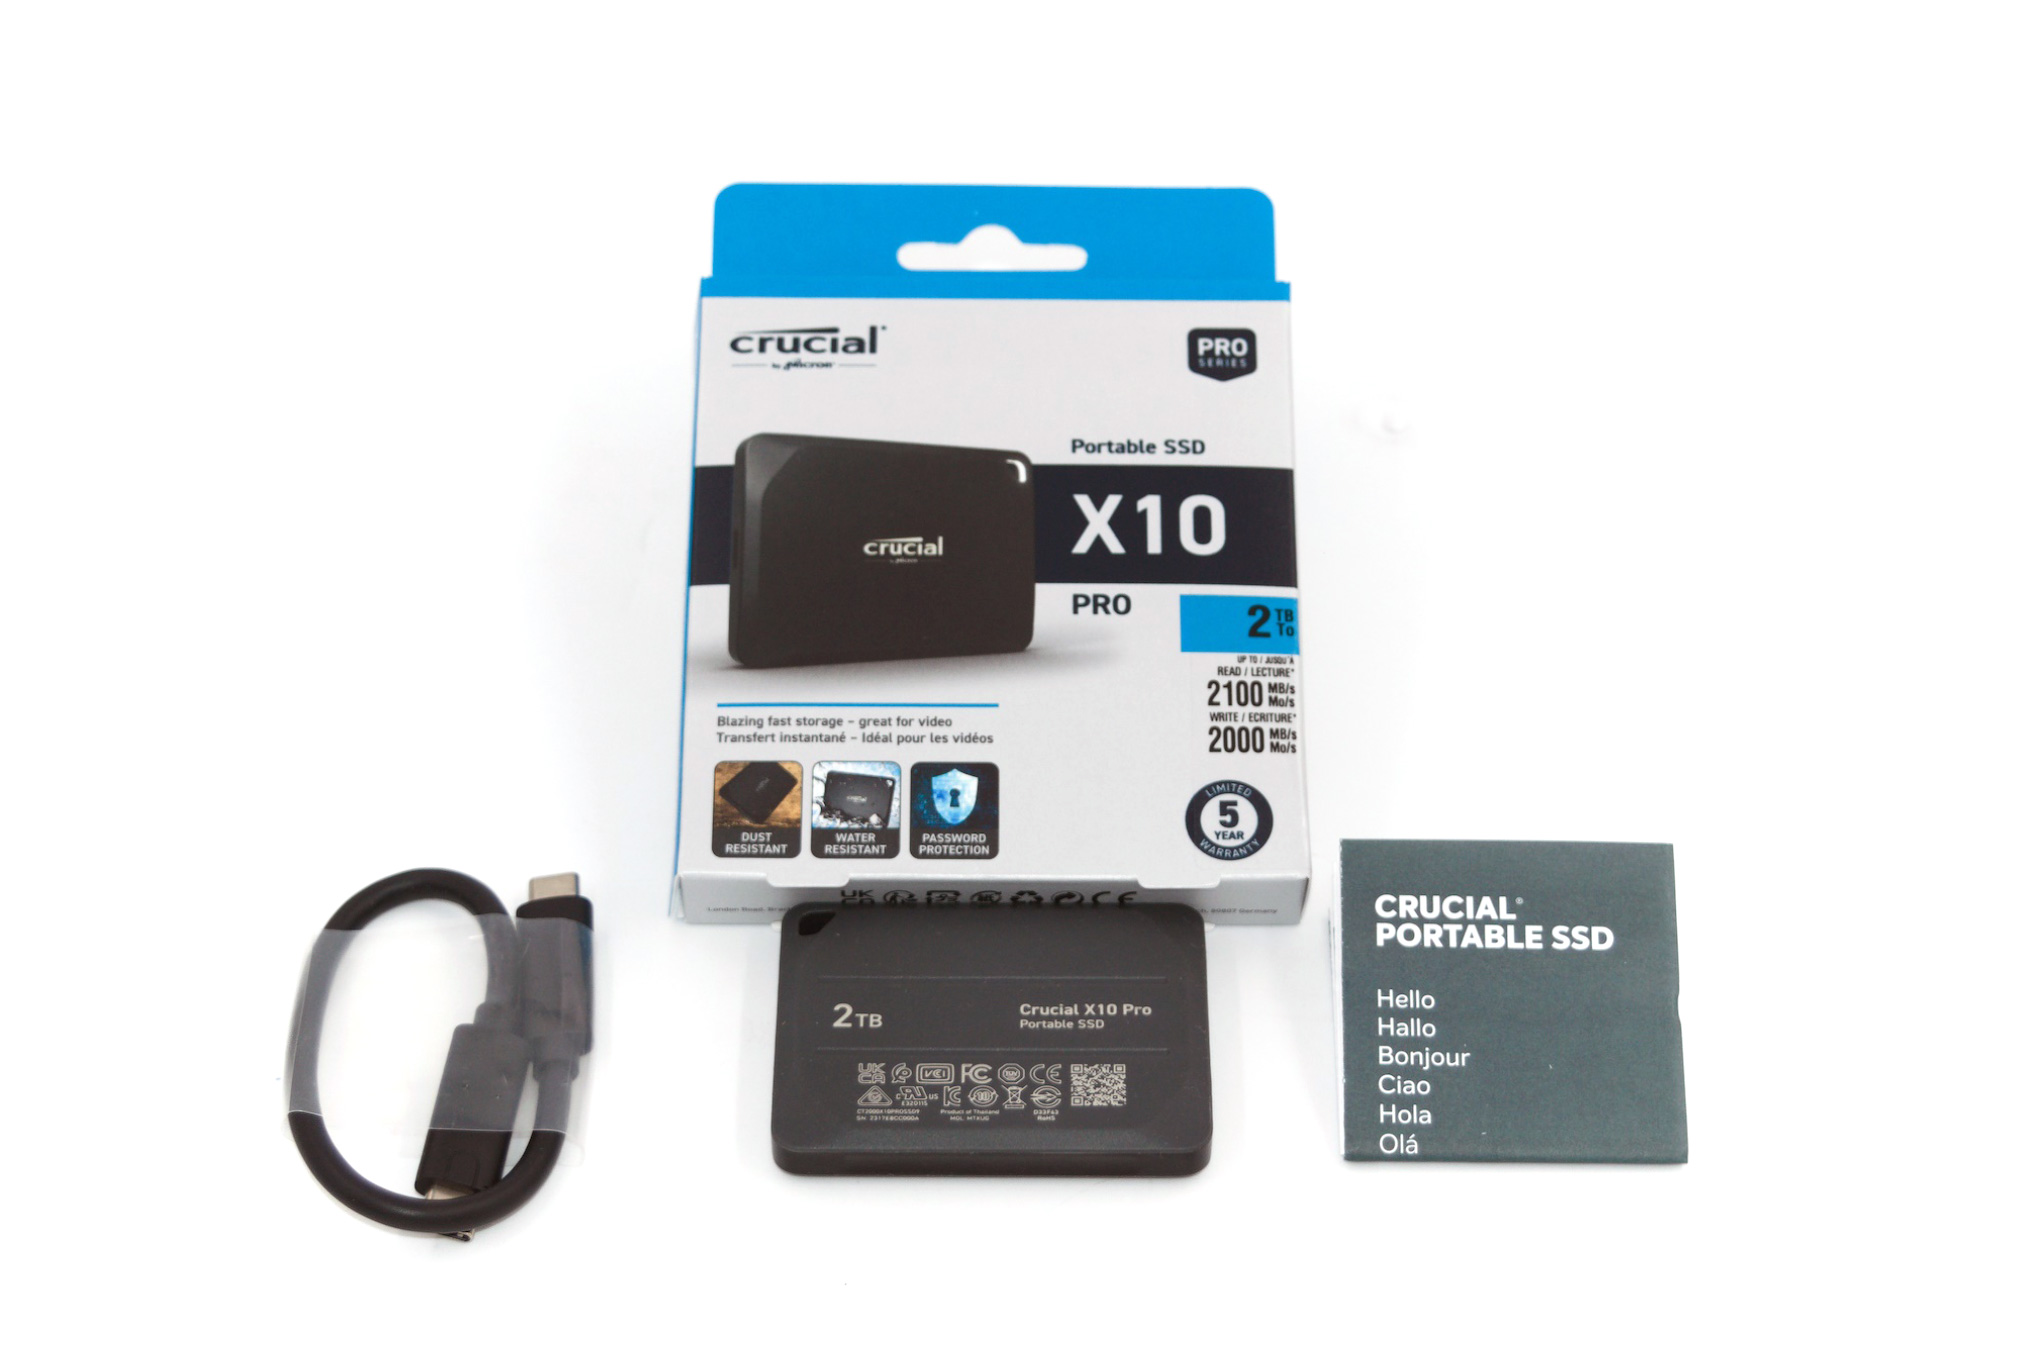 SSD externe Crucial X9 Pro 4 To USB 3.2